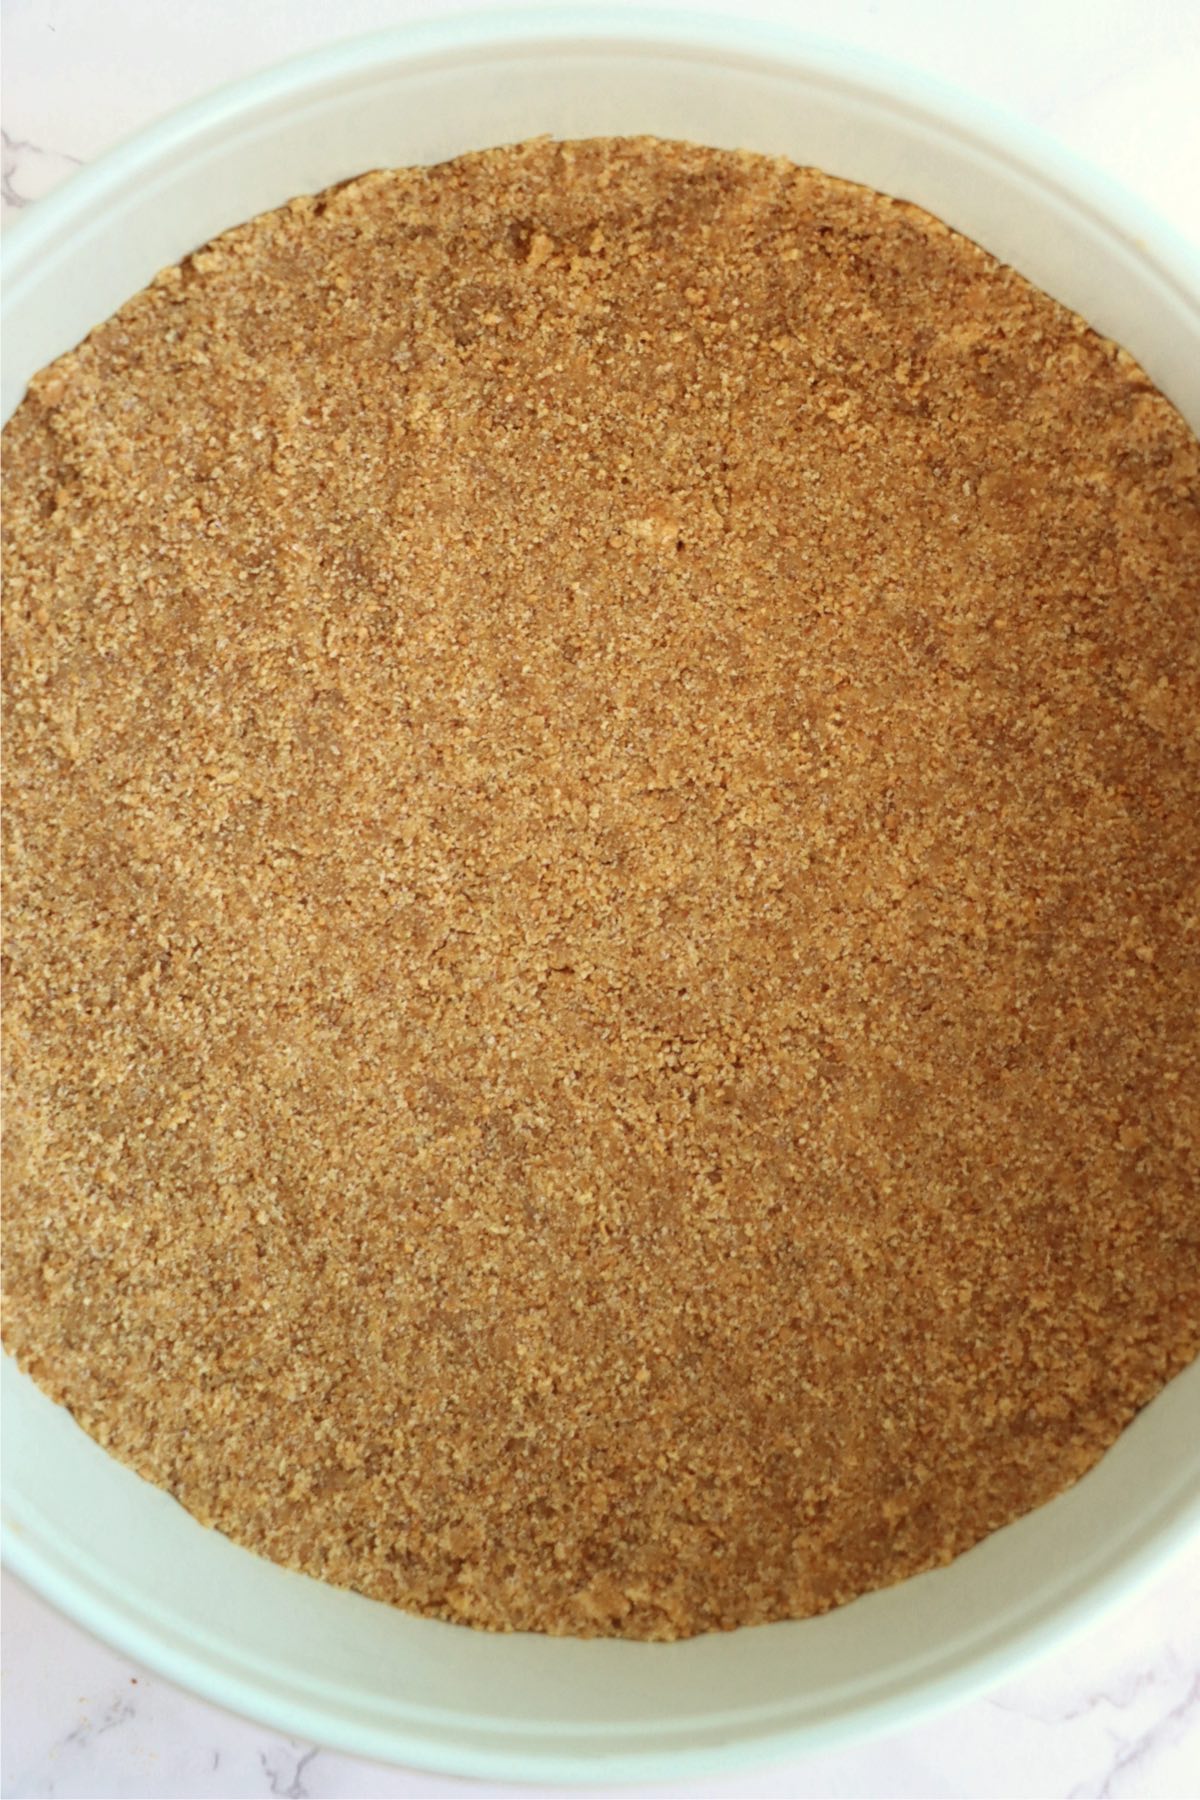 Graham crackers pressed into a crust in a pie pan